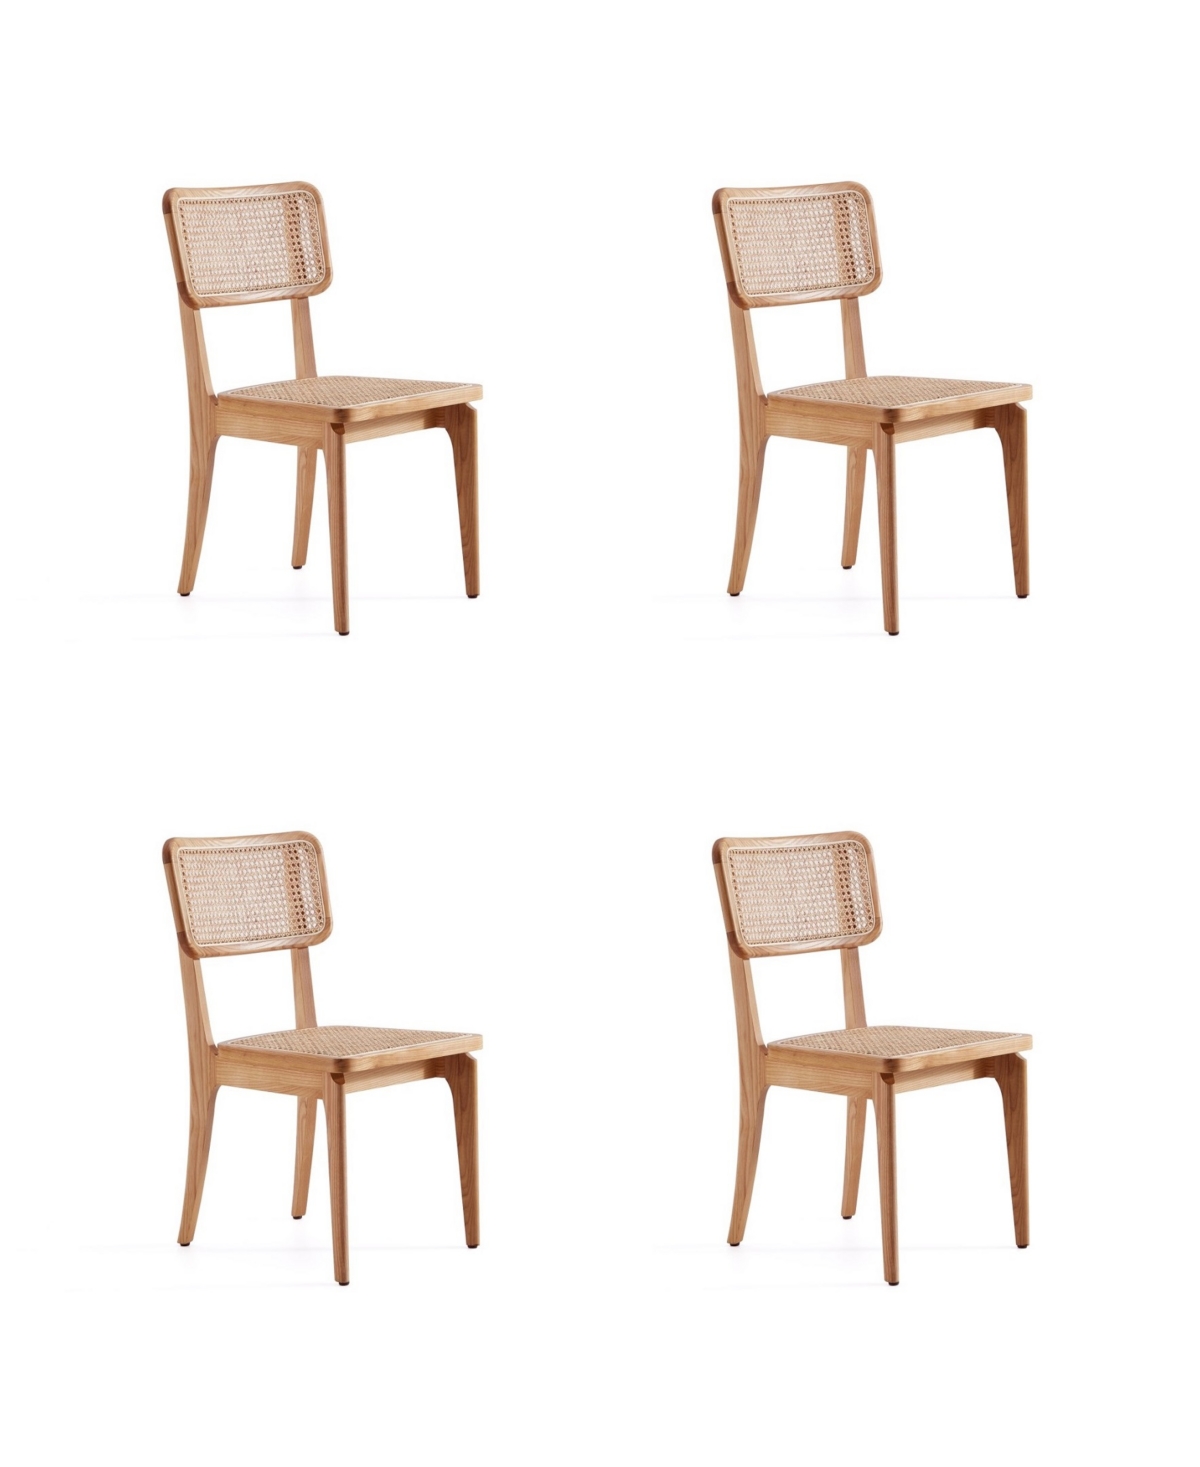 Manhattan Comfort Giverny 4-piece Ash Wood And Natural Cane Versatile Dining Chair In Nature